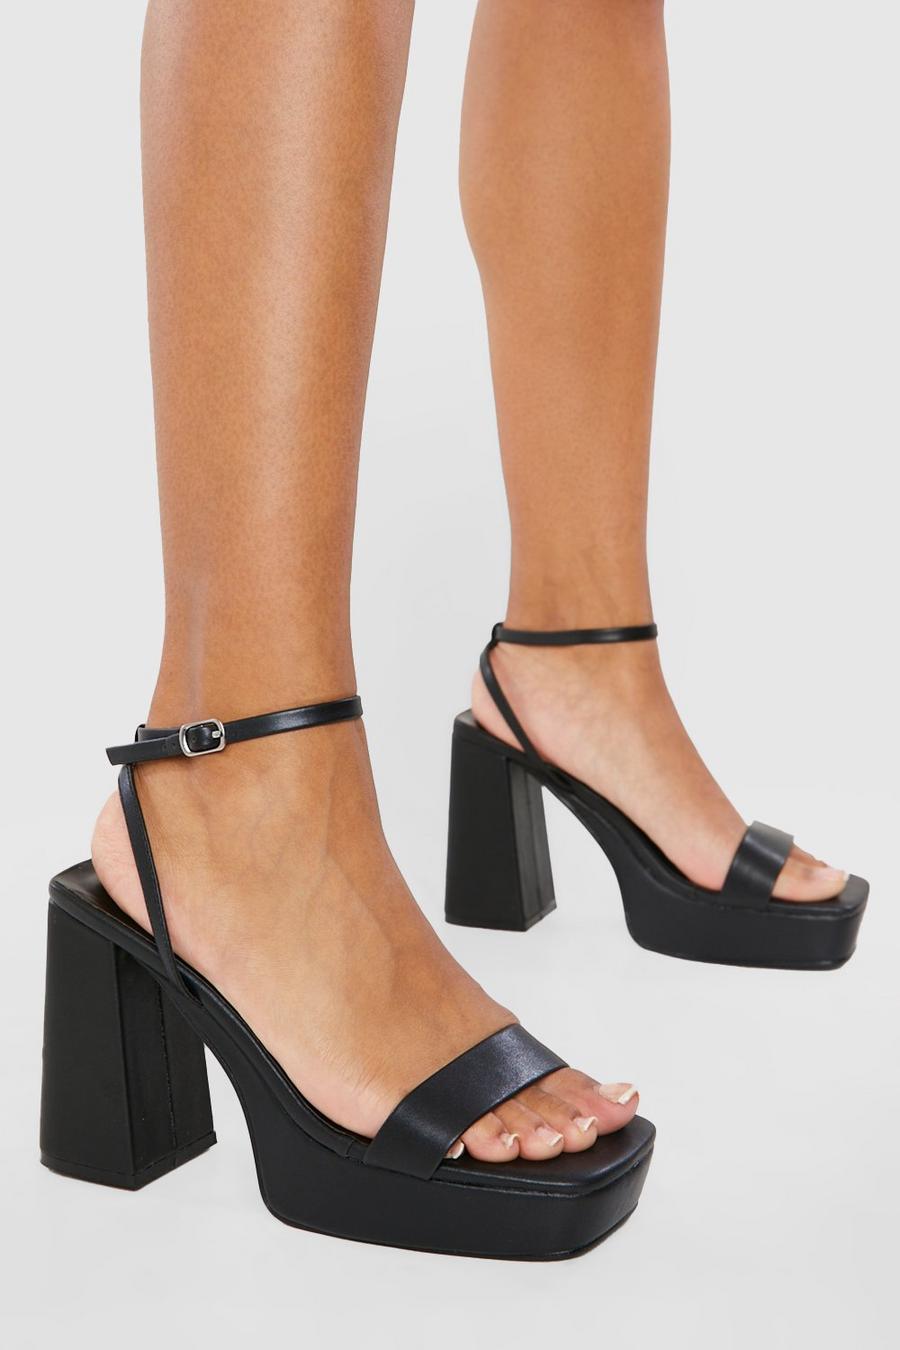 Black Wide Width Square Toe Barely There Platform Heel